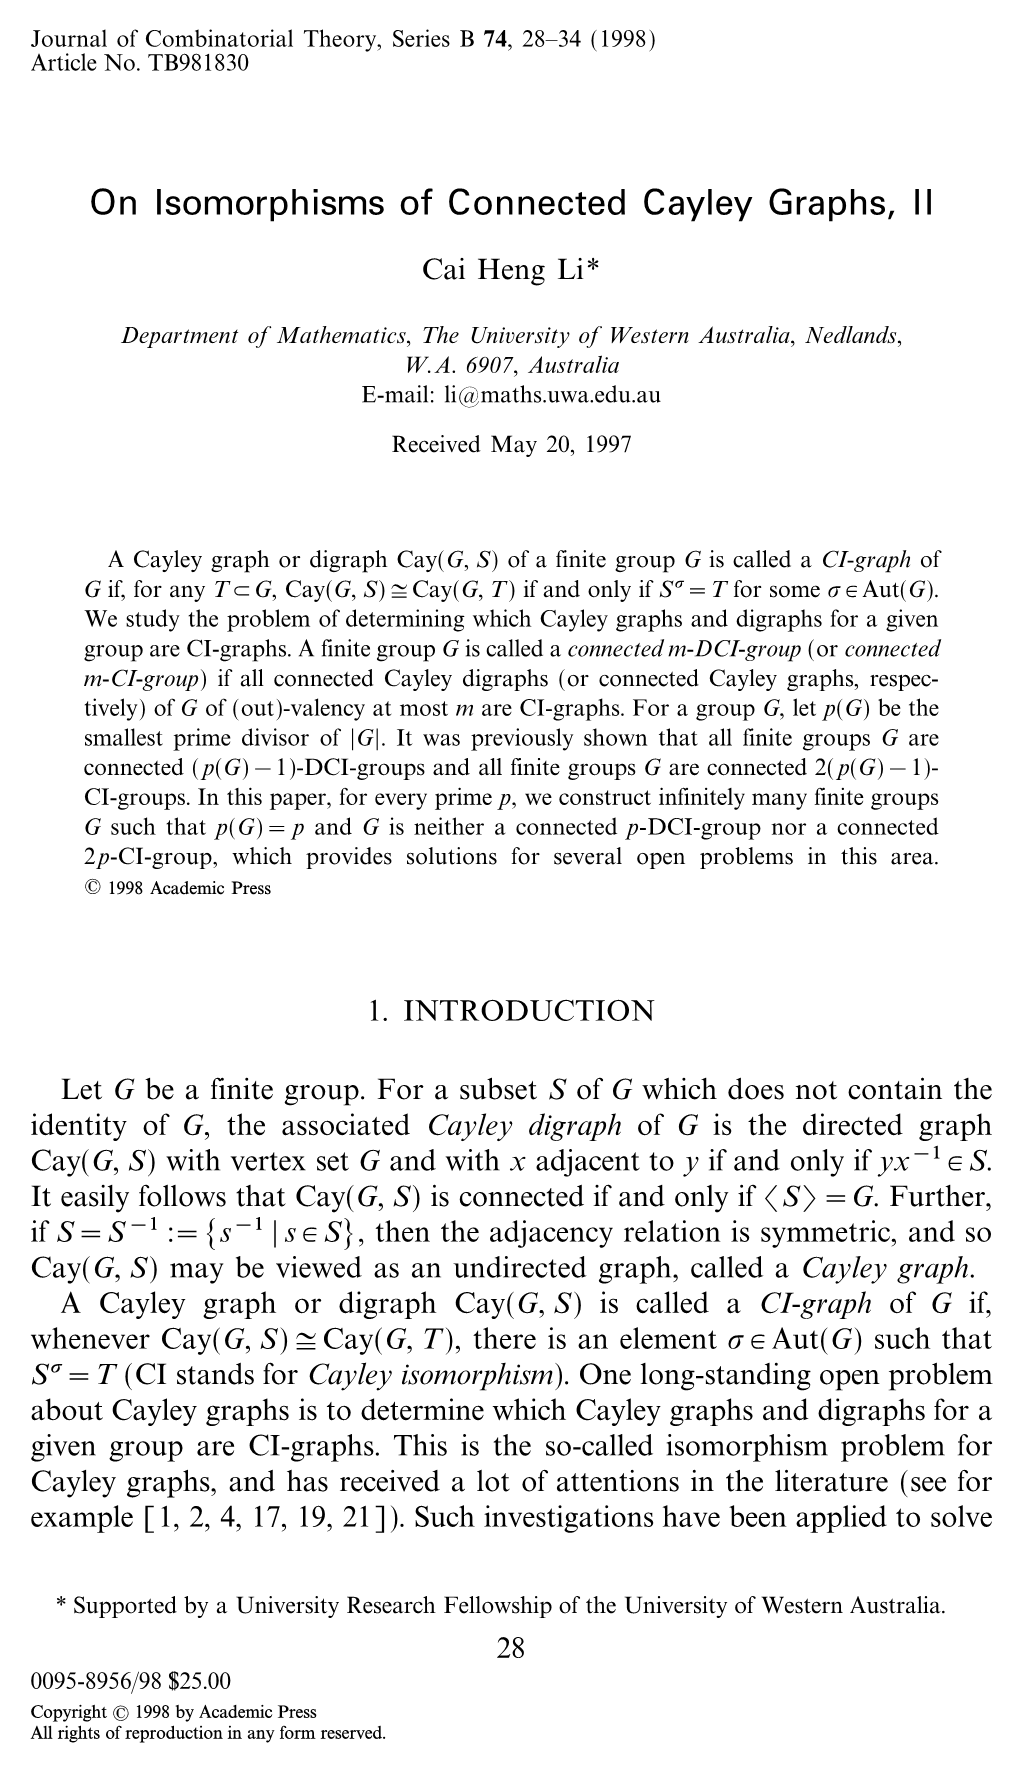 On Isomorphisms of Connected Cayley Graphs, II